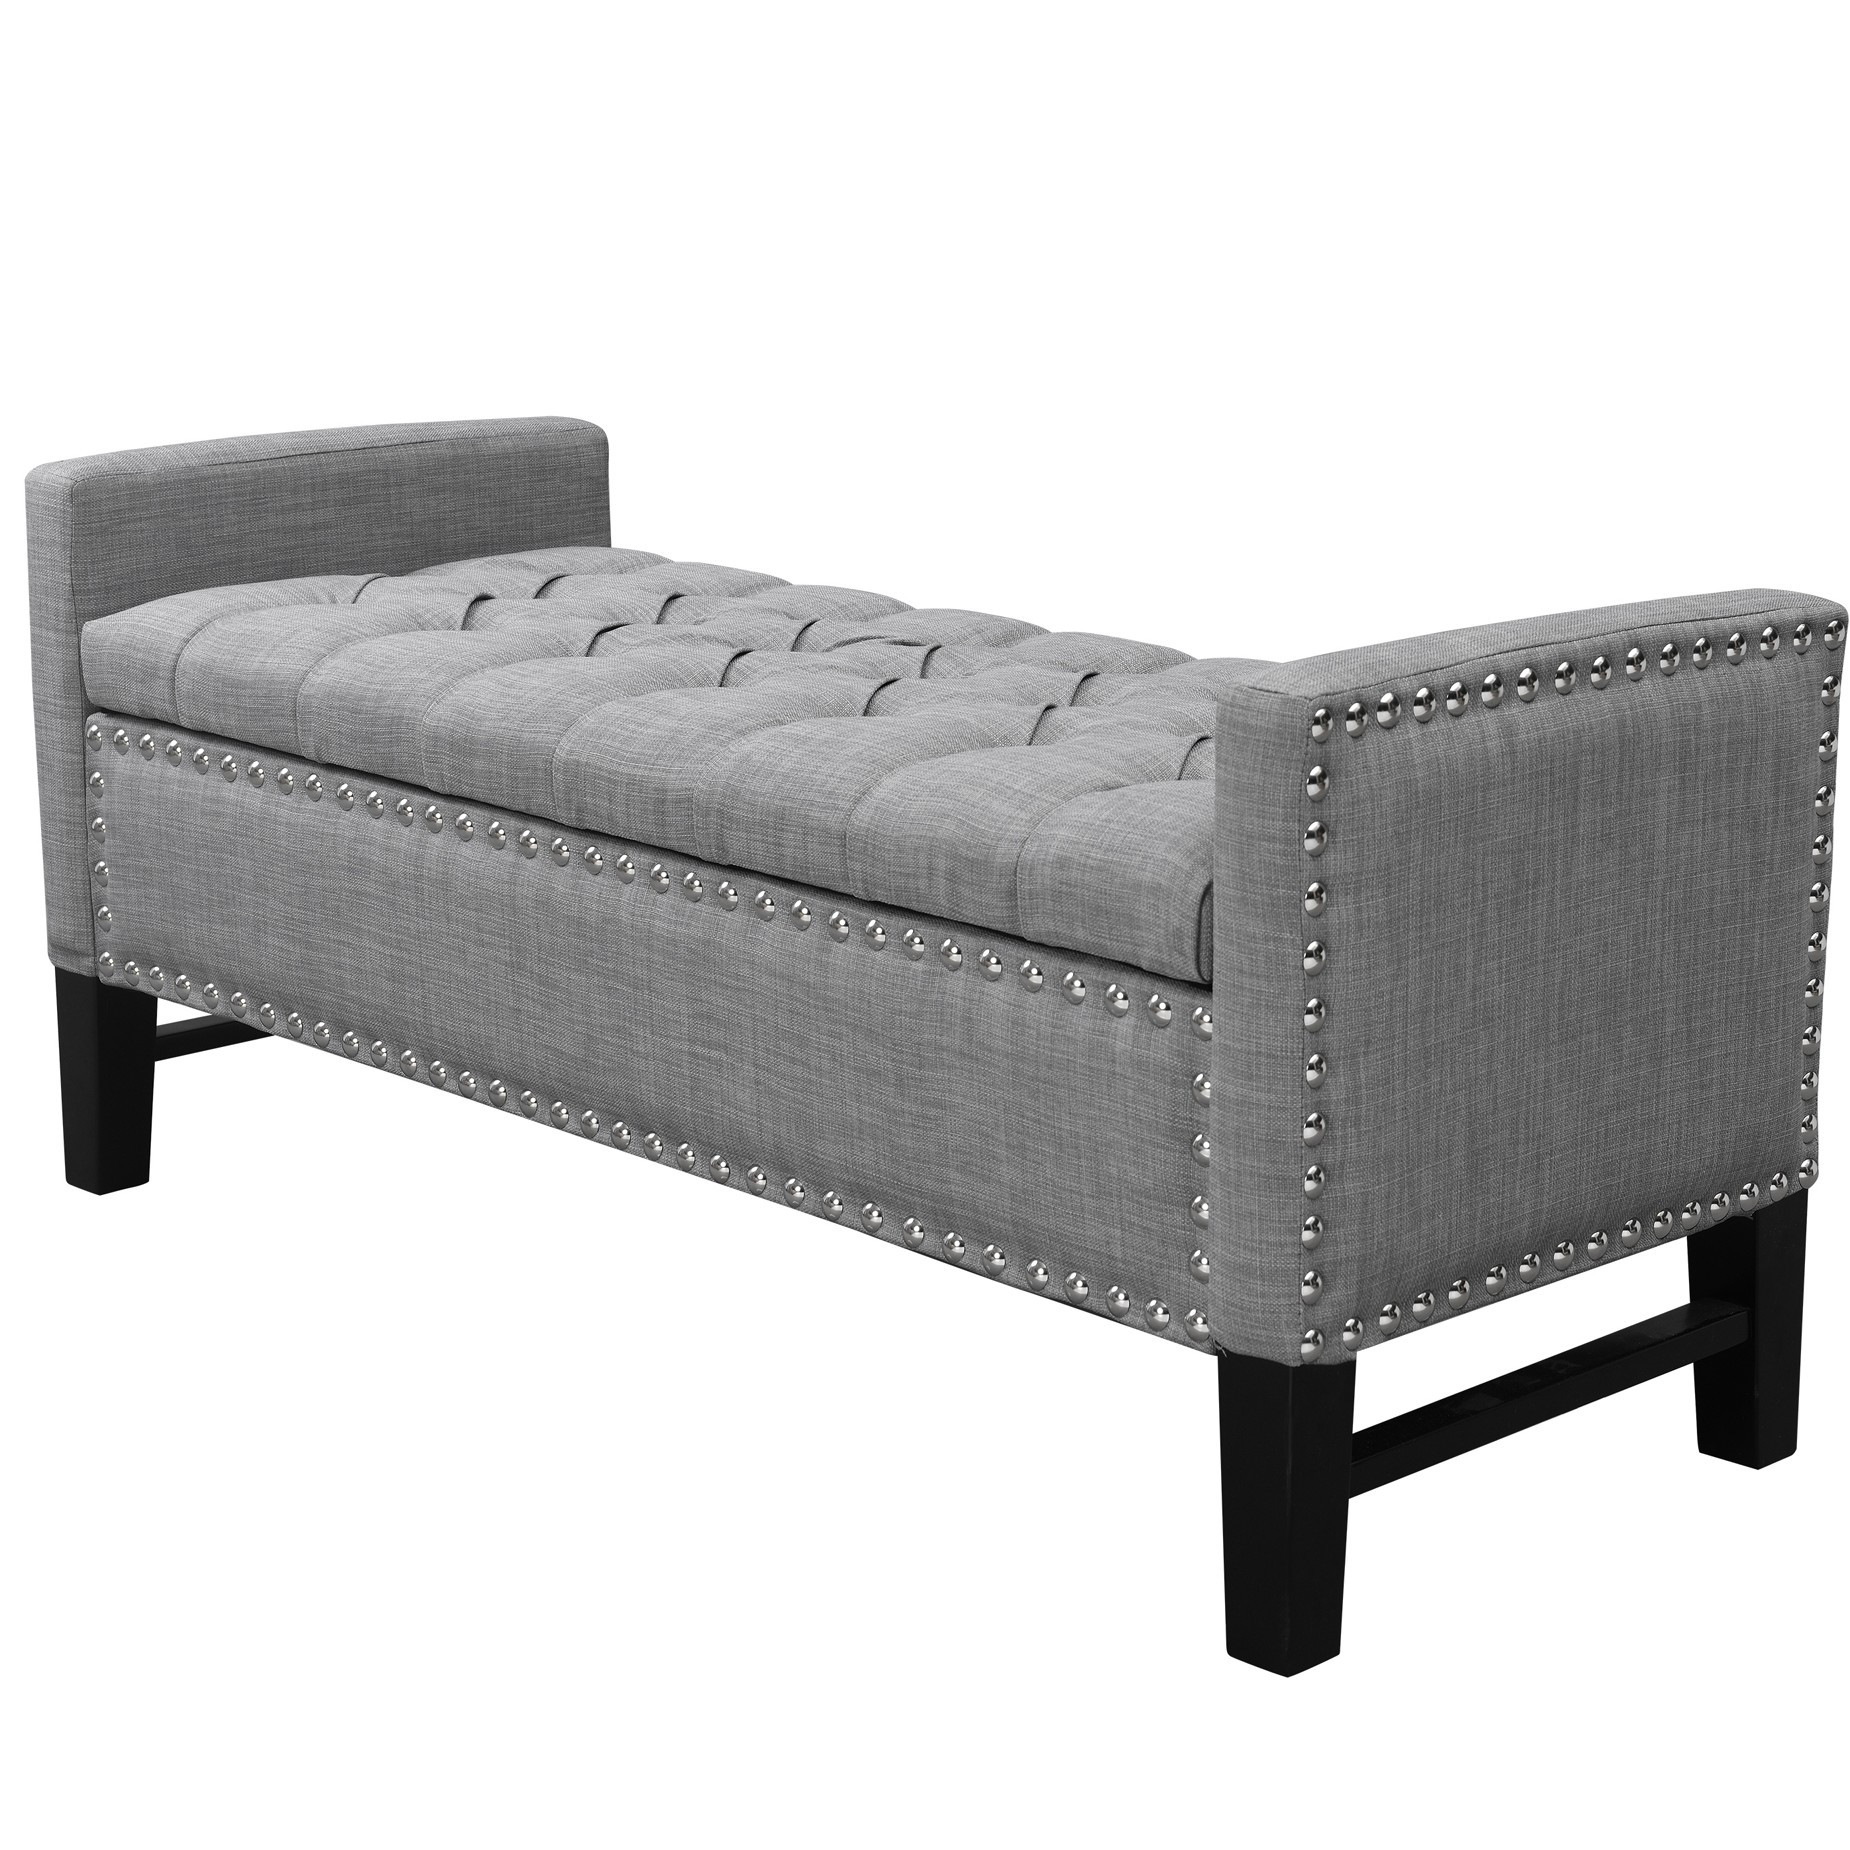 50" Light Gray and Black Upholstered Linen Bench with Flip top, Shoe Storage-530675-1